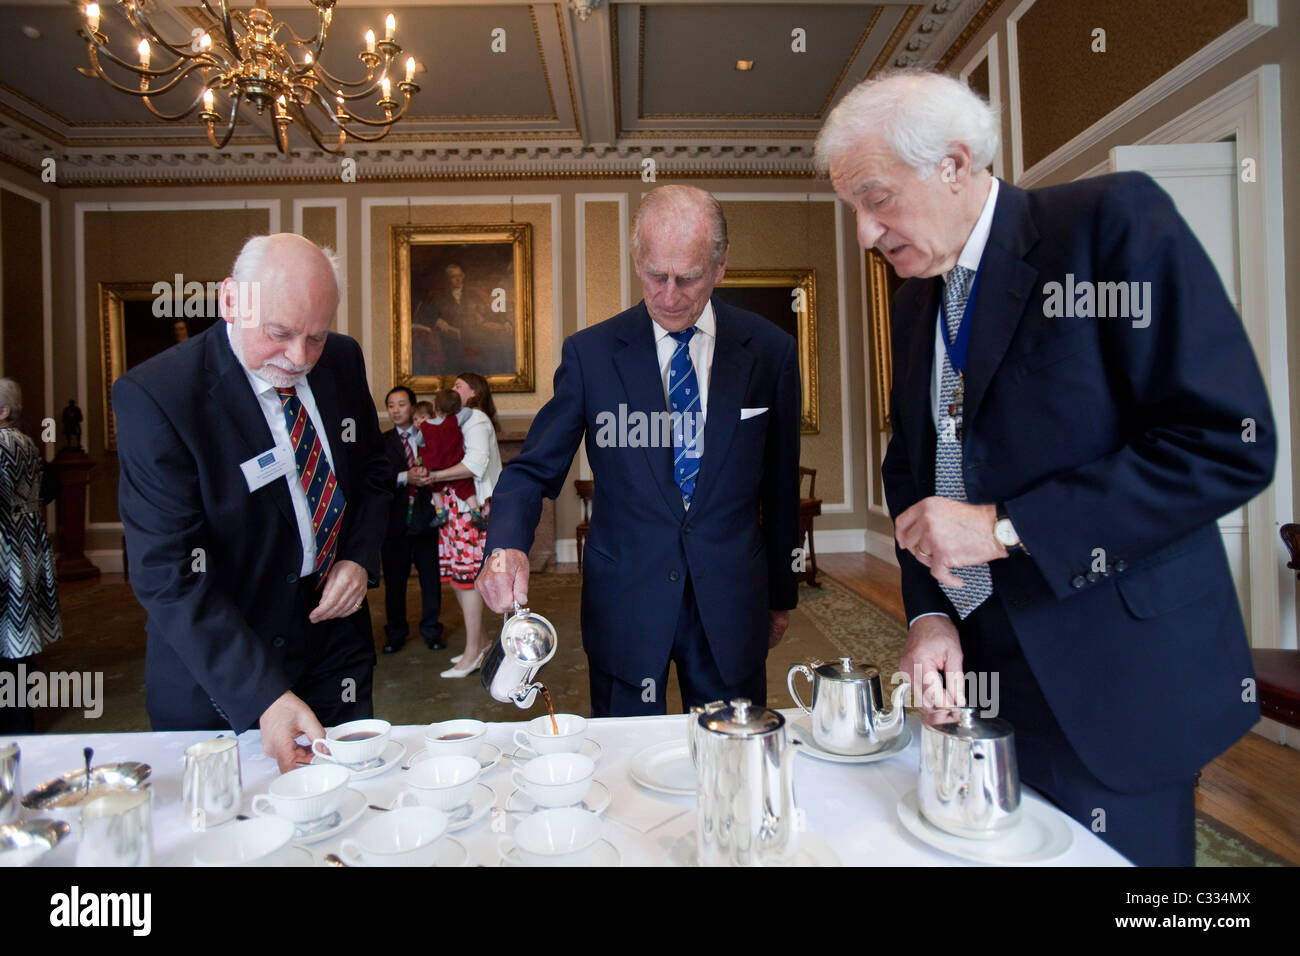 HRH Duke of Edinburgh, Prince Philip, pours tea for himself and others at the Royal Society of Edinburgh where he is patron. Stock Photo